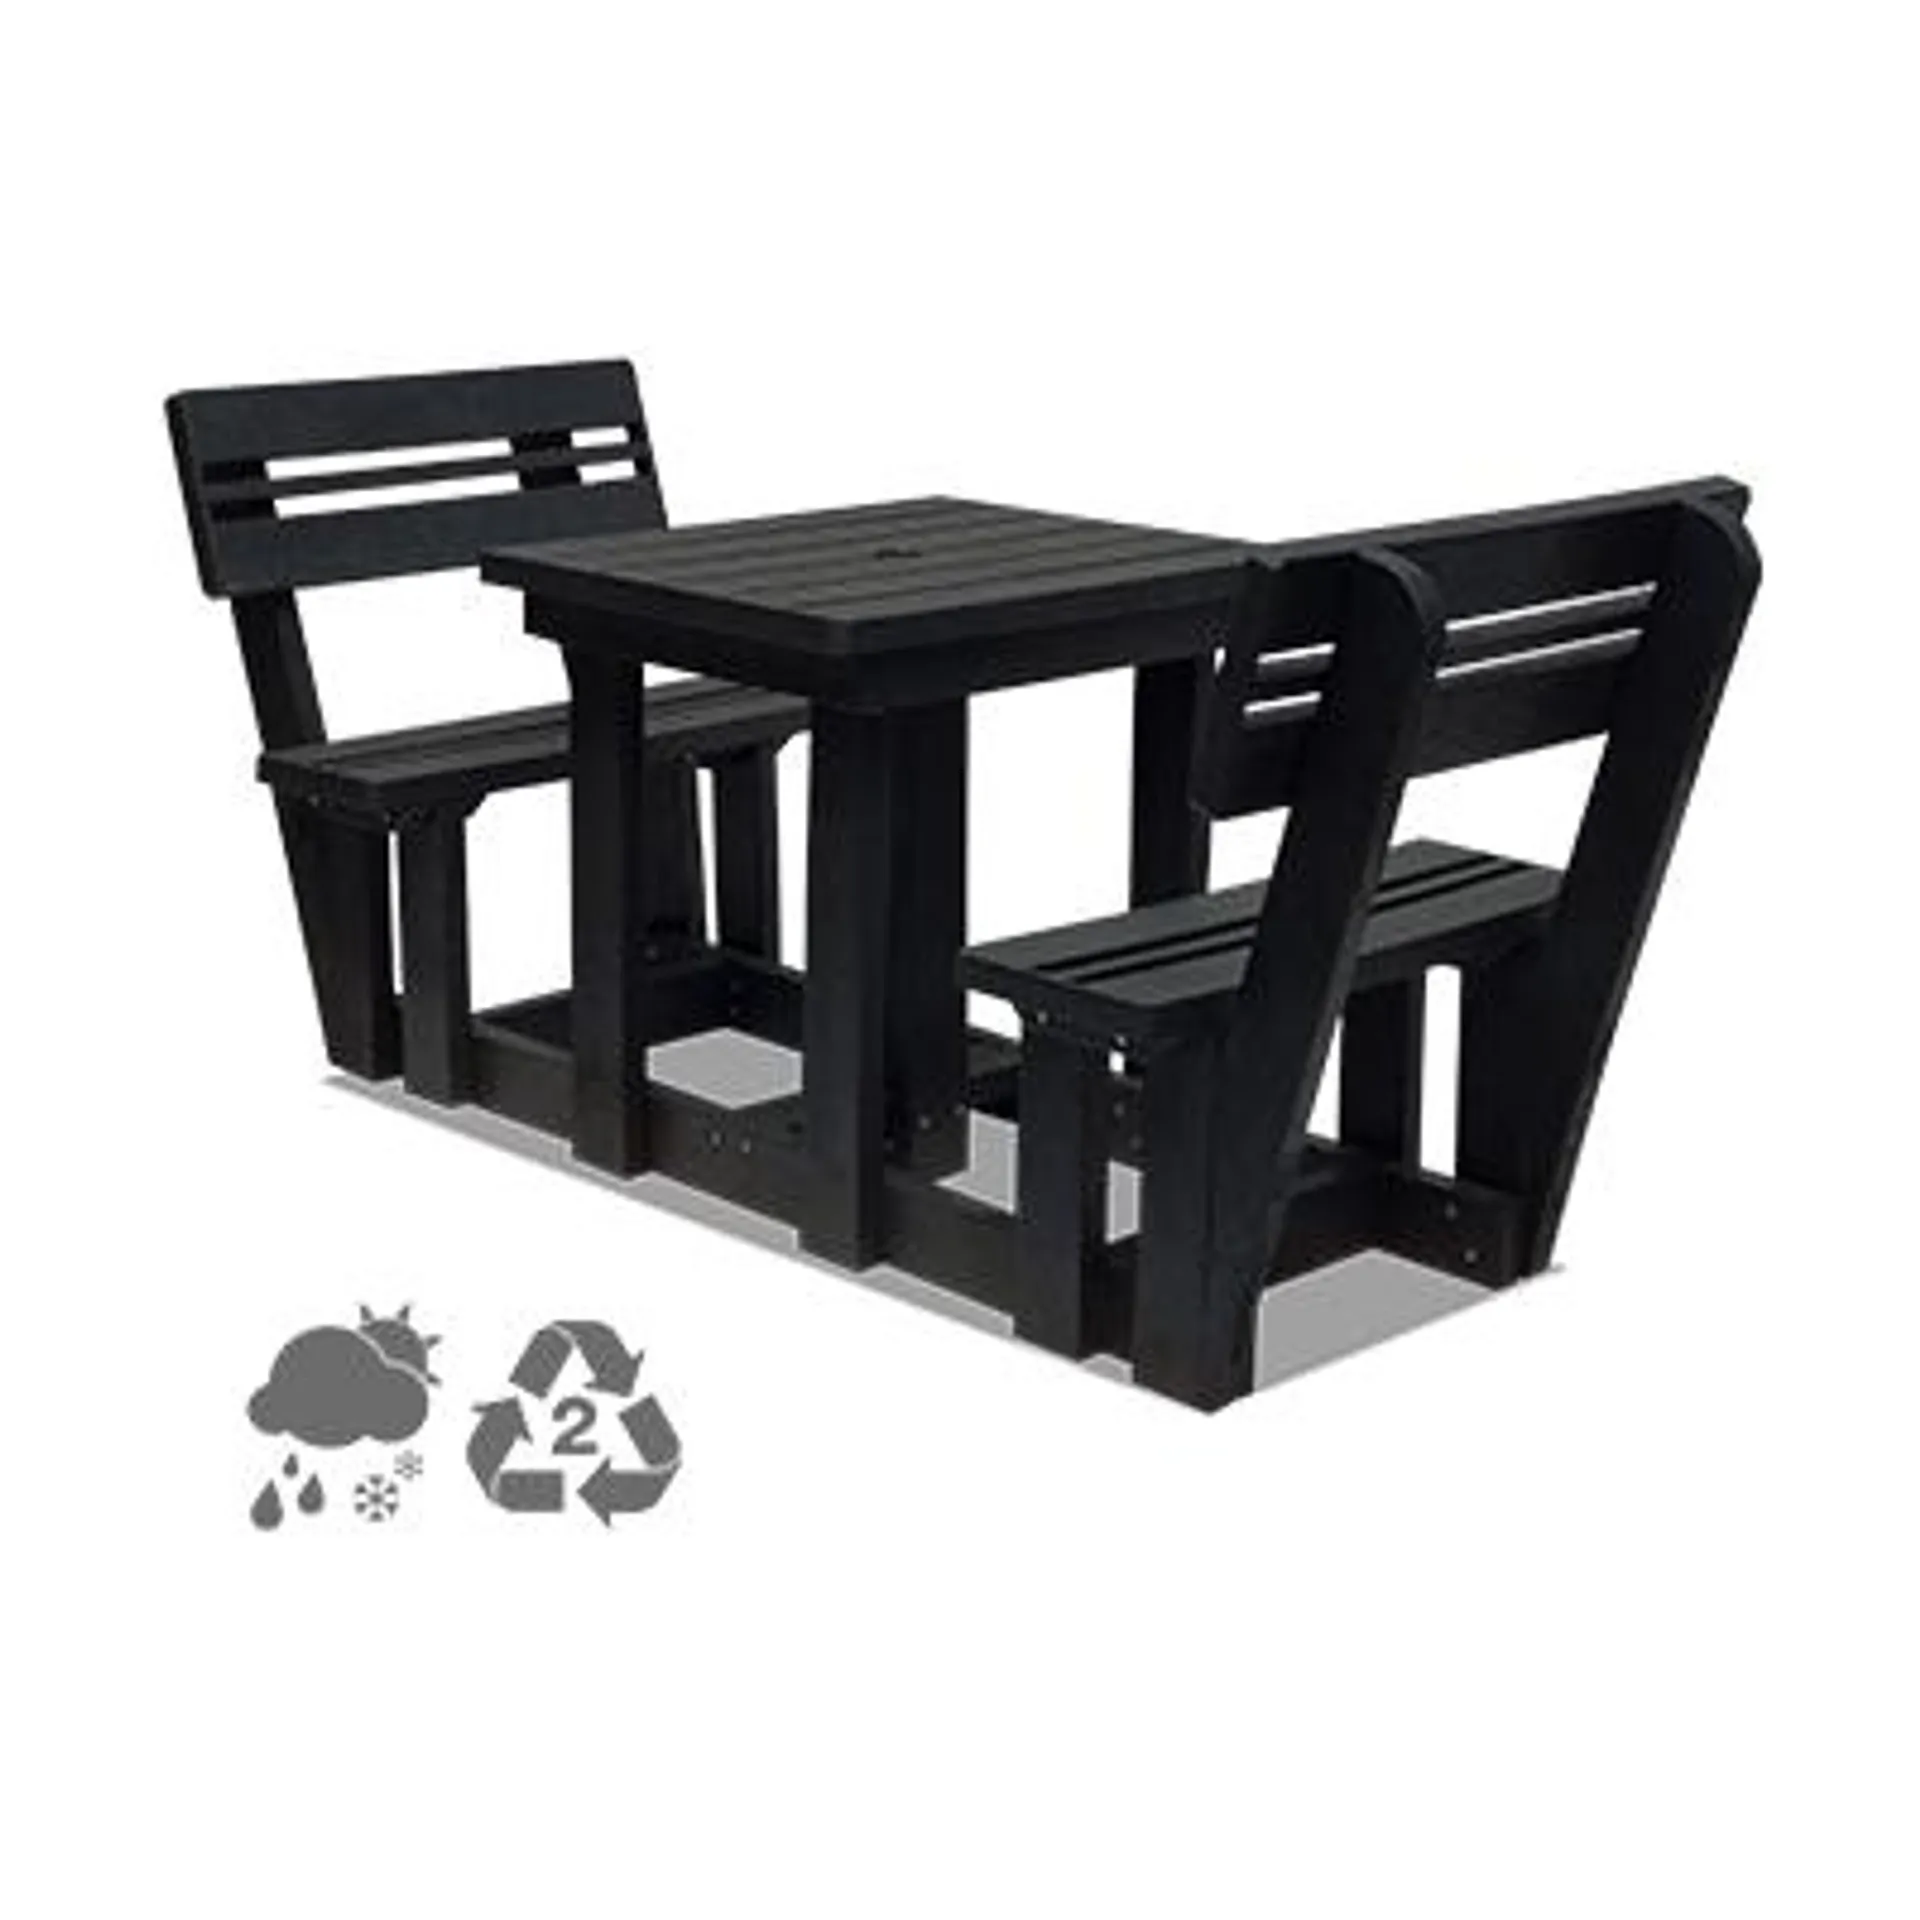 Picnic Table & Bench 2 seater with backrest